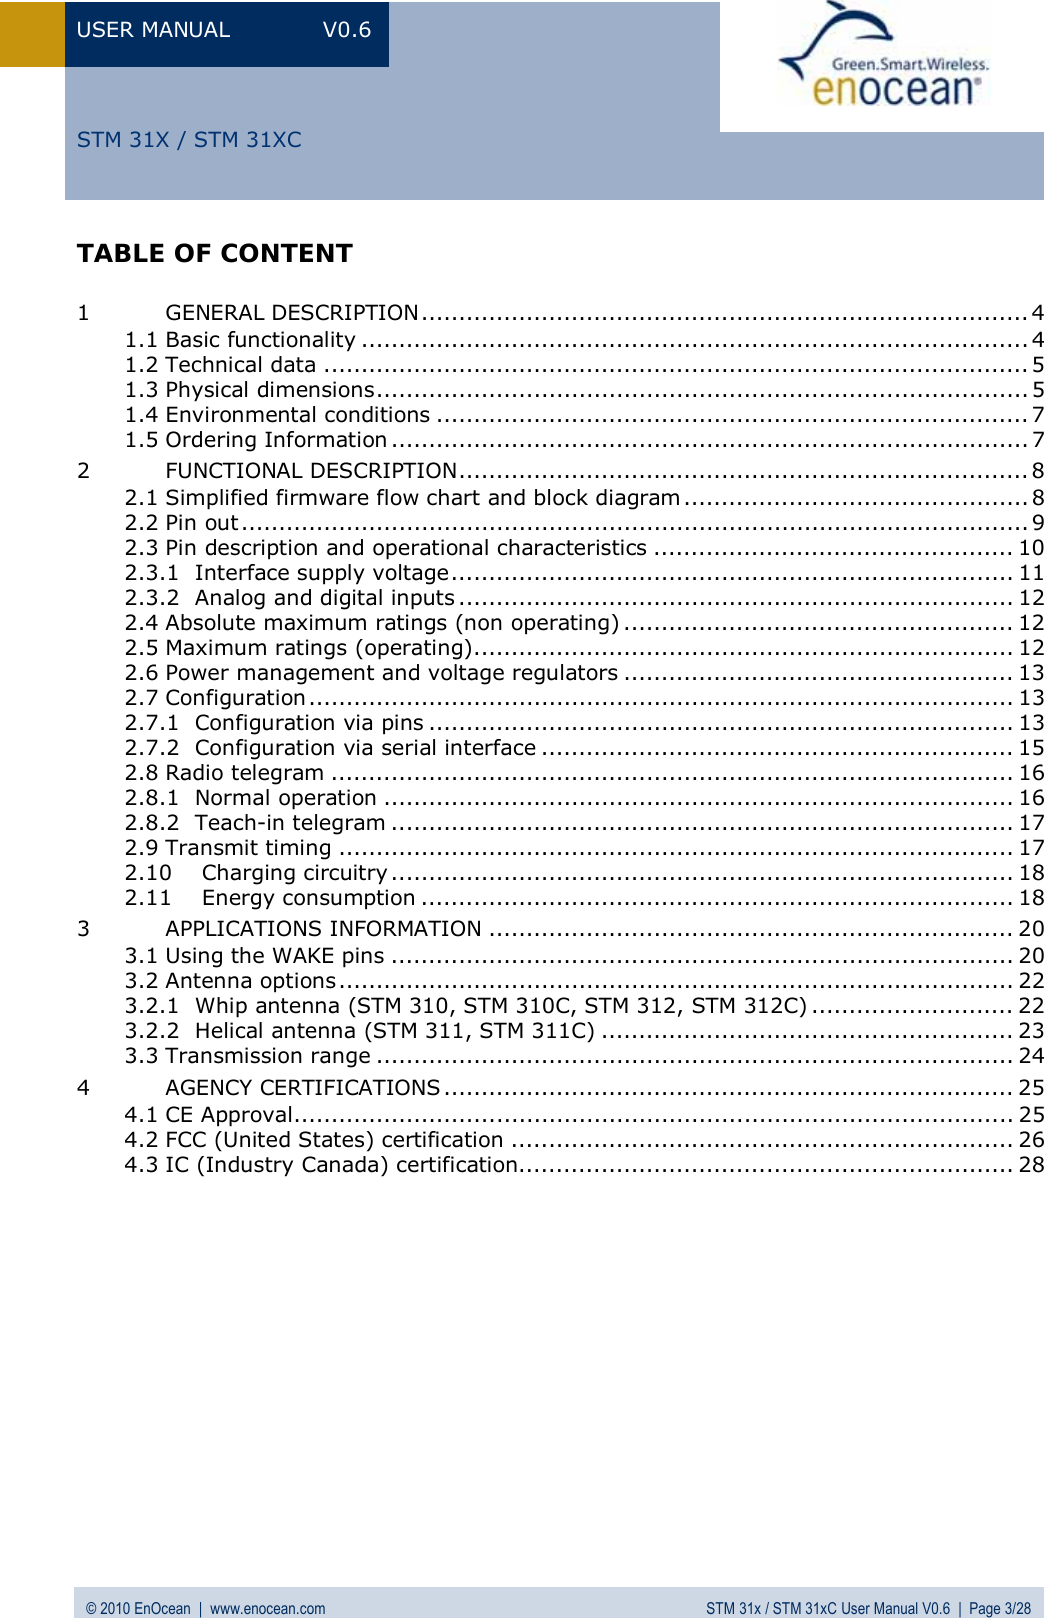 USER MANUAL V0.6 © 2010 EnOcean  |  www.enocean.com STM 31x / STM 31xC User Manual V0.6  |  Page 3/28  STM 31X / STM 31XCTABLE OF CONTENT  1 GENERAL DESCRIPTION................................................................................. 4 1.1 Basic functionality ......................................................................................... 4 1.2 Technical data .............................................................................................. 5 1.3 Physical dimensions....................................................................................... 5 1.4 Environmental conditions ............................................................................... 7 1.5 Ordering Information ..................................................................................... 7 2 FUNCTIONAL DESCRIPTION............................................................................ 8 2.1 Simplified firmware flow chart and block diagram.............................................. 8 2.2 Pin out......................................................................................................... 9 2.3 Pin description and operational characteristics ................................................ 10 2.3.1 Interface supply voltage........................................................................... 11 2.3.2 Analog and digital inputs .......................................................................... 12 2.4 Absolute maximum ratings (non operating) .................................................... 12 2.5 Maximum ratings (operating)........................................................................ 12 2.6 Power management and voltage regulators .................................................... 13 2.7 Configuration.............................................................................................. 13 2.7.1 Configuration via pins .............................................................................. 13 2.7.2 Configuration via serial interface ............................................................... 15 2.8 Radio telegram ........................................................................................... 16 2.8.1 Normal operation .................................................................................... 16 2.8.2 Teach-in telegram ................................................................................... 17 2.9 Transmit timing .......................................................................................... 17 2.10 Charging circuitry ................................................................................... 18 2.11 Energy consumption ............................................................................... 18 3 APPLICATIONS INFORMATION ...................................................................... 20 3.1 Using the WAKE pins ................................................................................... 20 3.2 Antenna options.......................................................................................... 22 3.2.1 Whip antenna (STM 310, STM 310C, STM 312, STM 312C) ........................... 22 3.2.2 Helical antenna (STM 311, STM 311C) ....................................................... 23 3.3 Transmission range ..................................................................................... 24 4 AGENCY CERTIFICATIONS ............................................................................ 25 4.1 CE Approval................................................................................................ 25 4.2 FCC (United States) certification ................................................................... 26 4.3 IC (Industry Canada) certification.................................................................. 28  